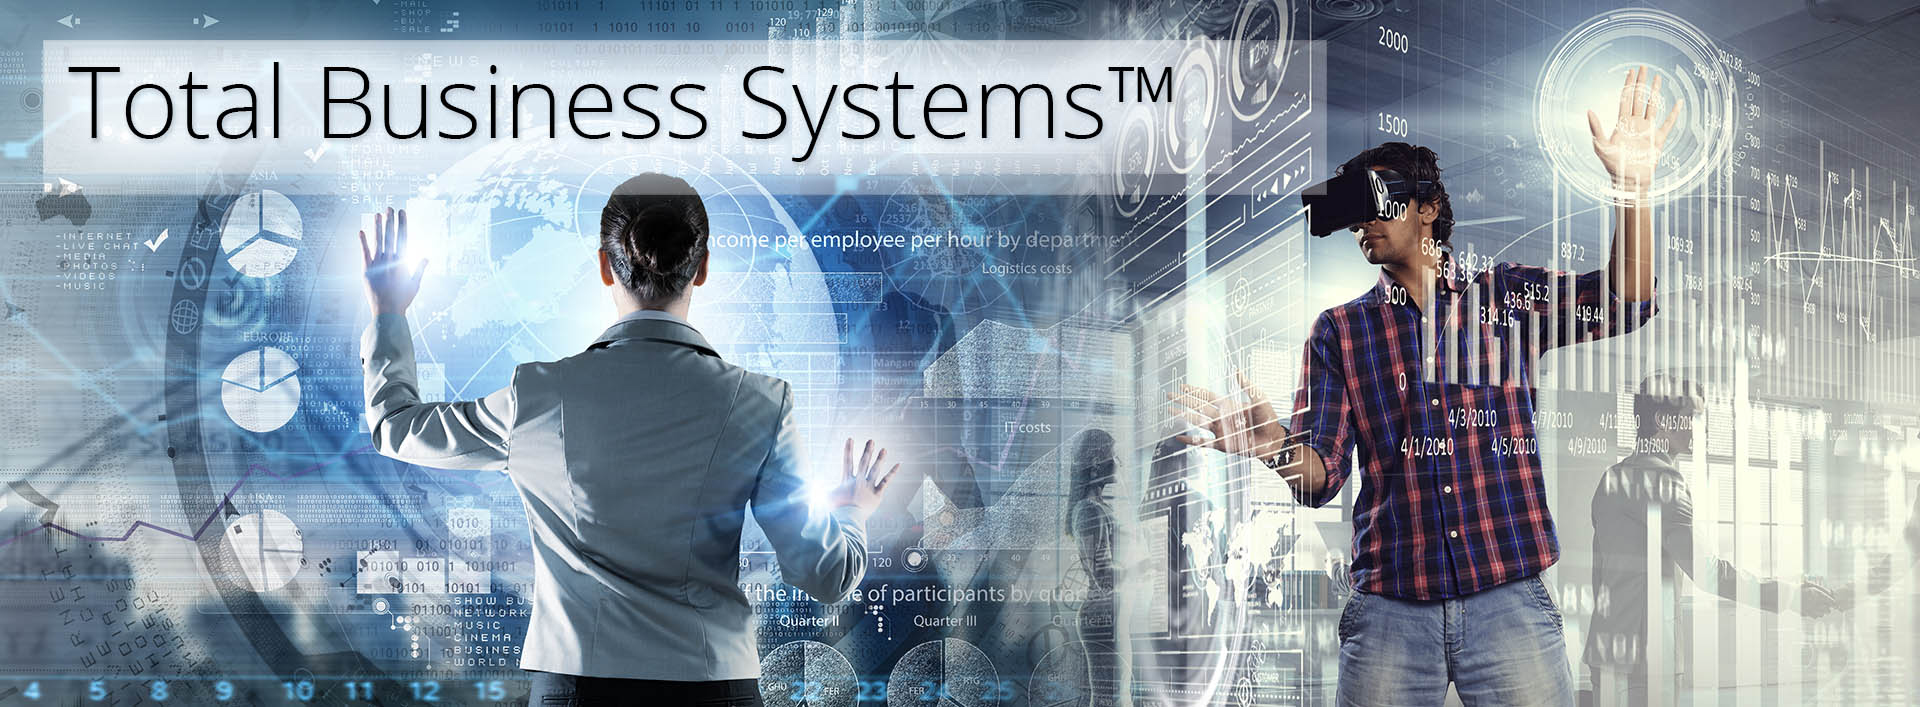 Total Business Systems